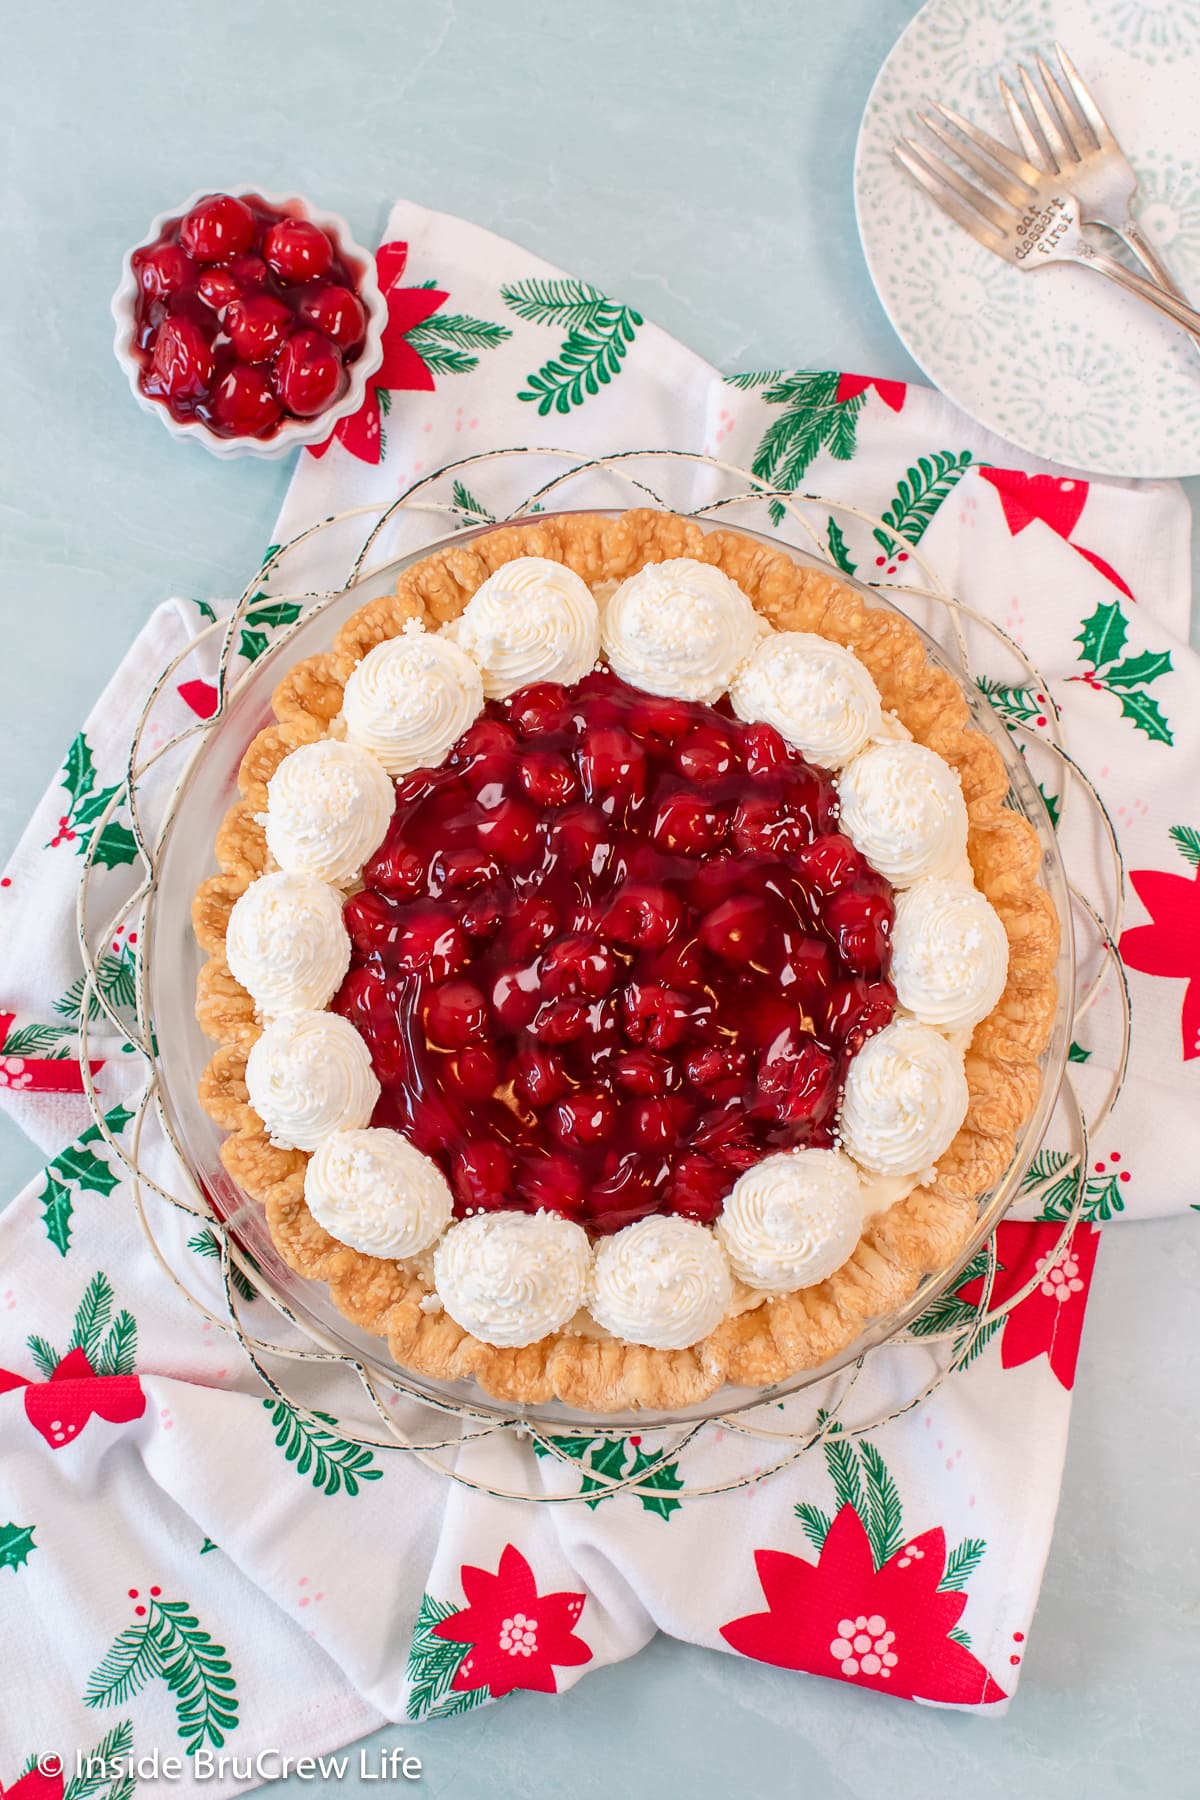 On overhead picture of a decorated cherry cheese pie.